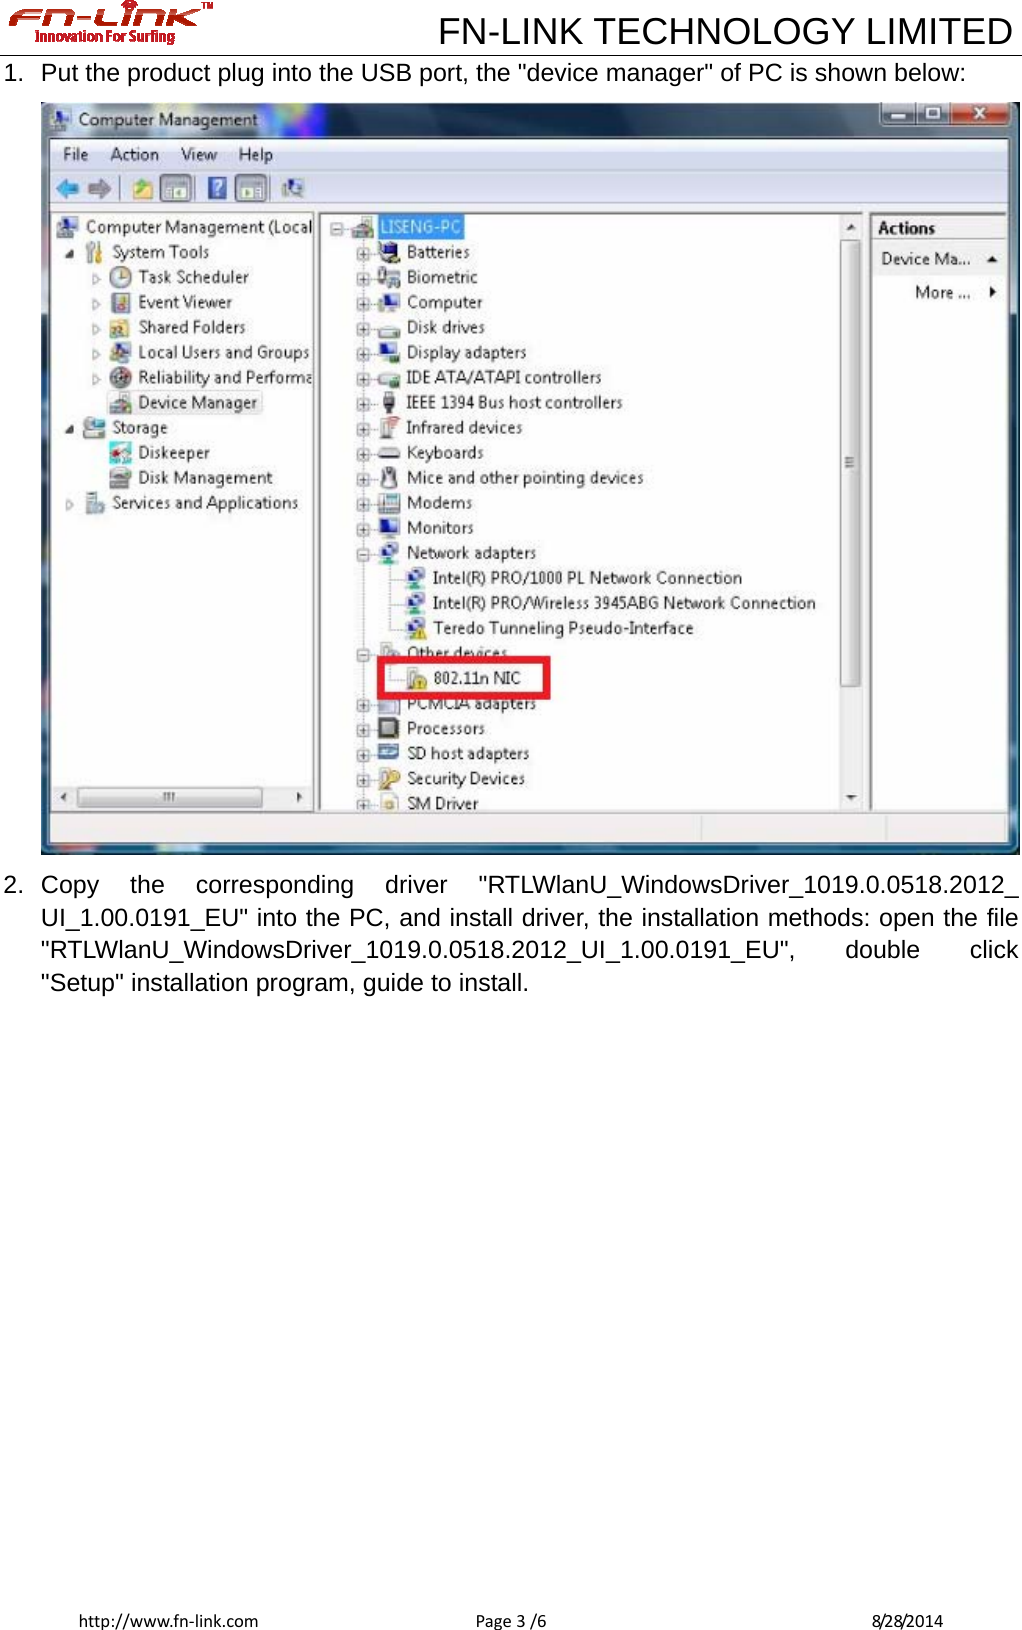             FN-LINK TECHNOLOGY LIMITEDhttp://www.fn‐link.comPage3/6 8/28/20141.  Put the product plug into the USB port, the &quot;device manager&quot; of PC is shown below:  2. Copy the corresponding driver &quot;RTLWlanU_WindowsDriver_1019.0.0518.2012_ UI_1.00.0191_EU&quot; into the PC, and install driver, the installation methods: open the file &quot;RTLWlanU_WindowsDriver_1019.0.0518.2012_UI_1.00.0191_EU&quot;, double click &quot;Setup&quot; installation program, guide to install. 